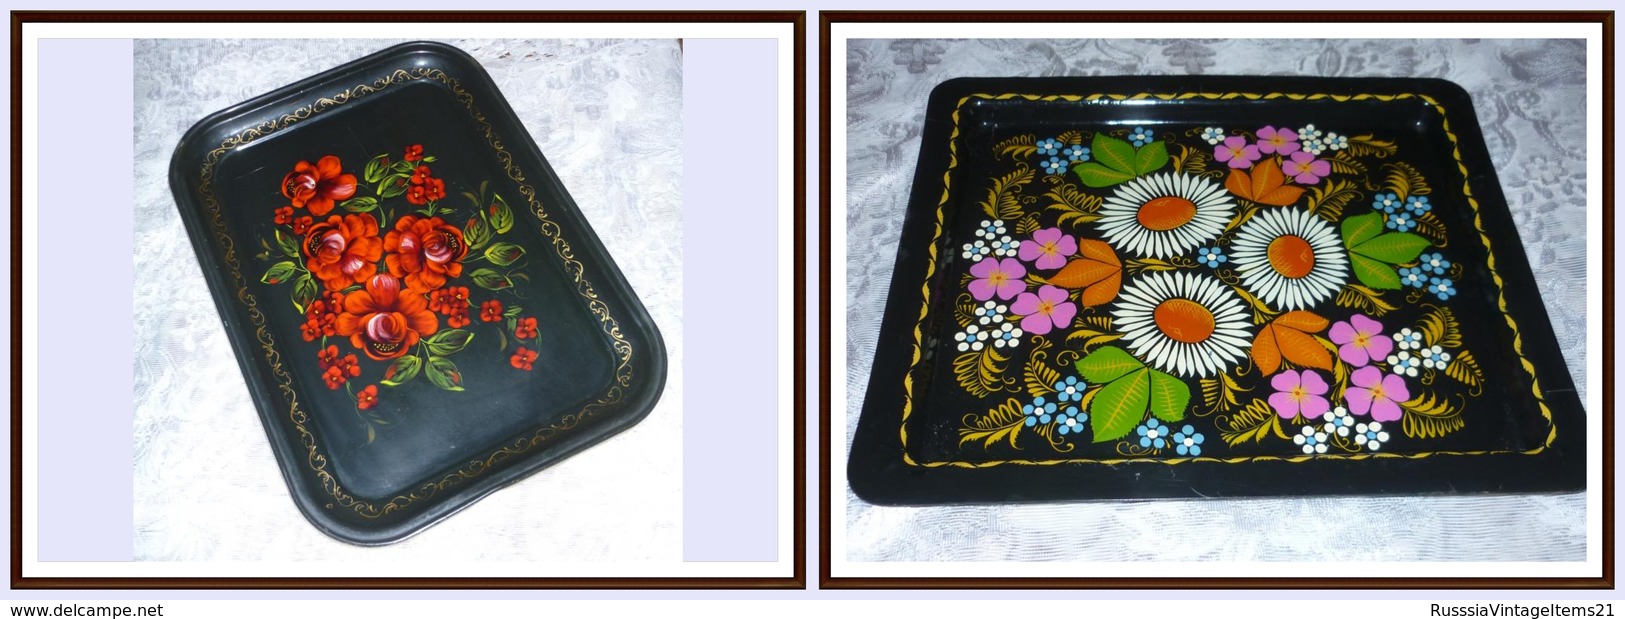 Vintage Russian (USSR) Metal Plate - Tray // Hand-painted - Schalen Und Tabletts